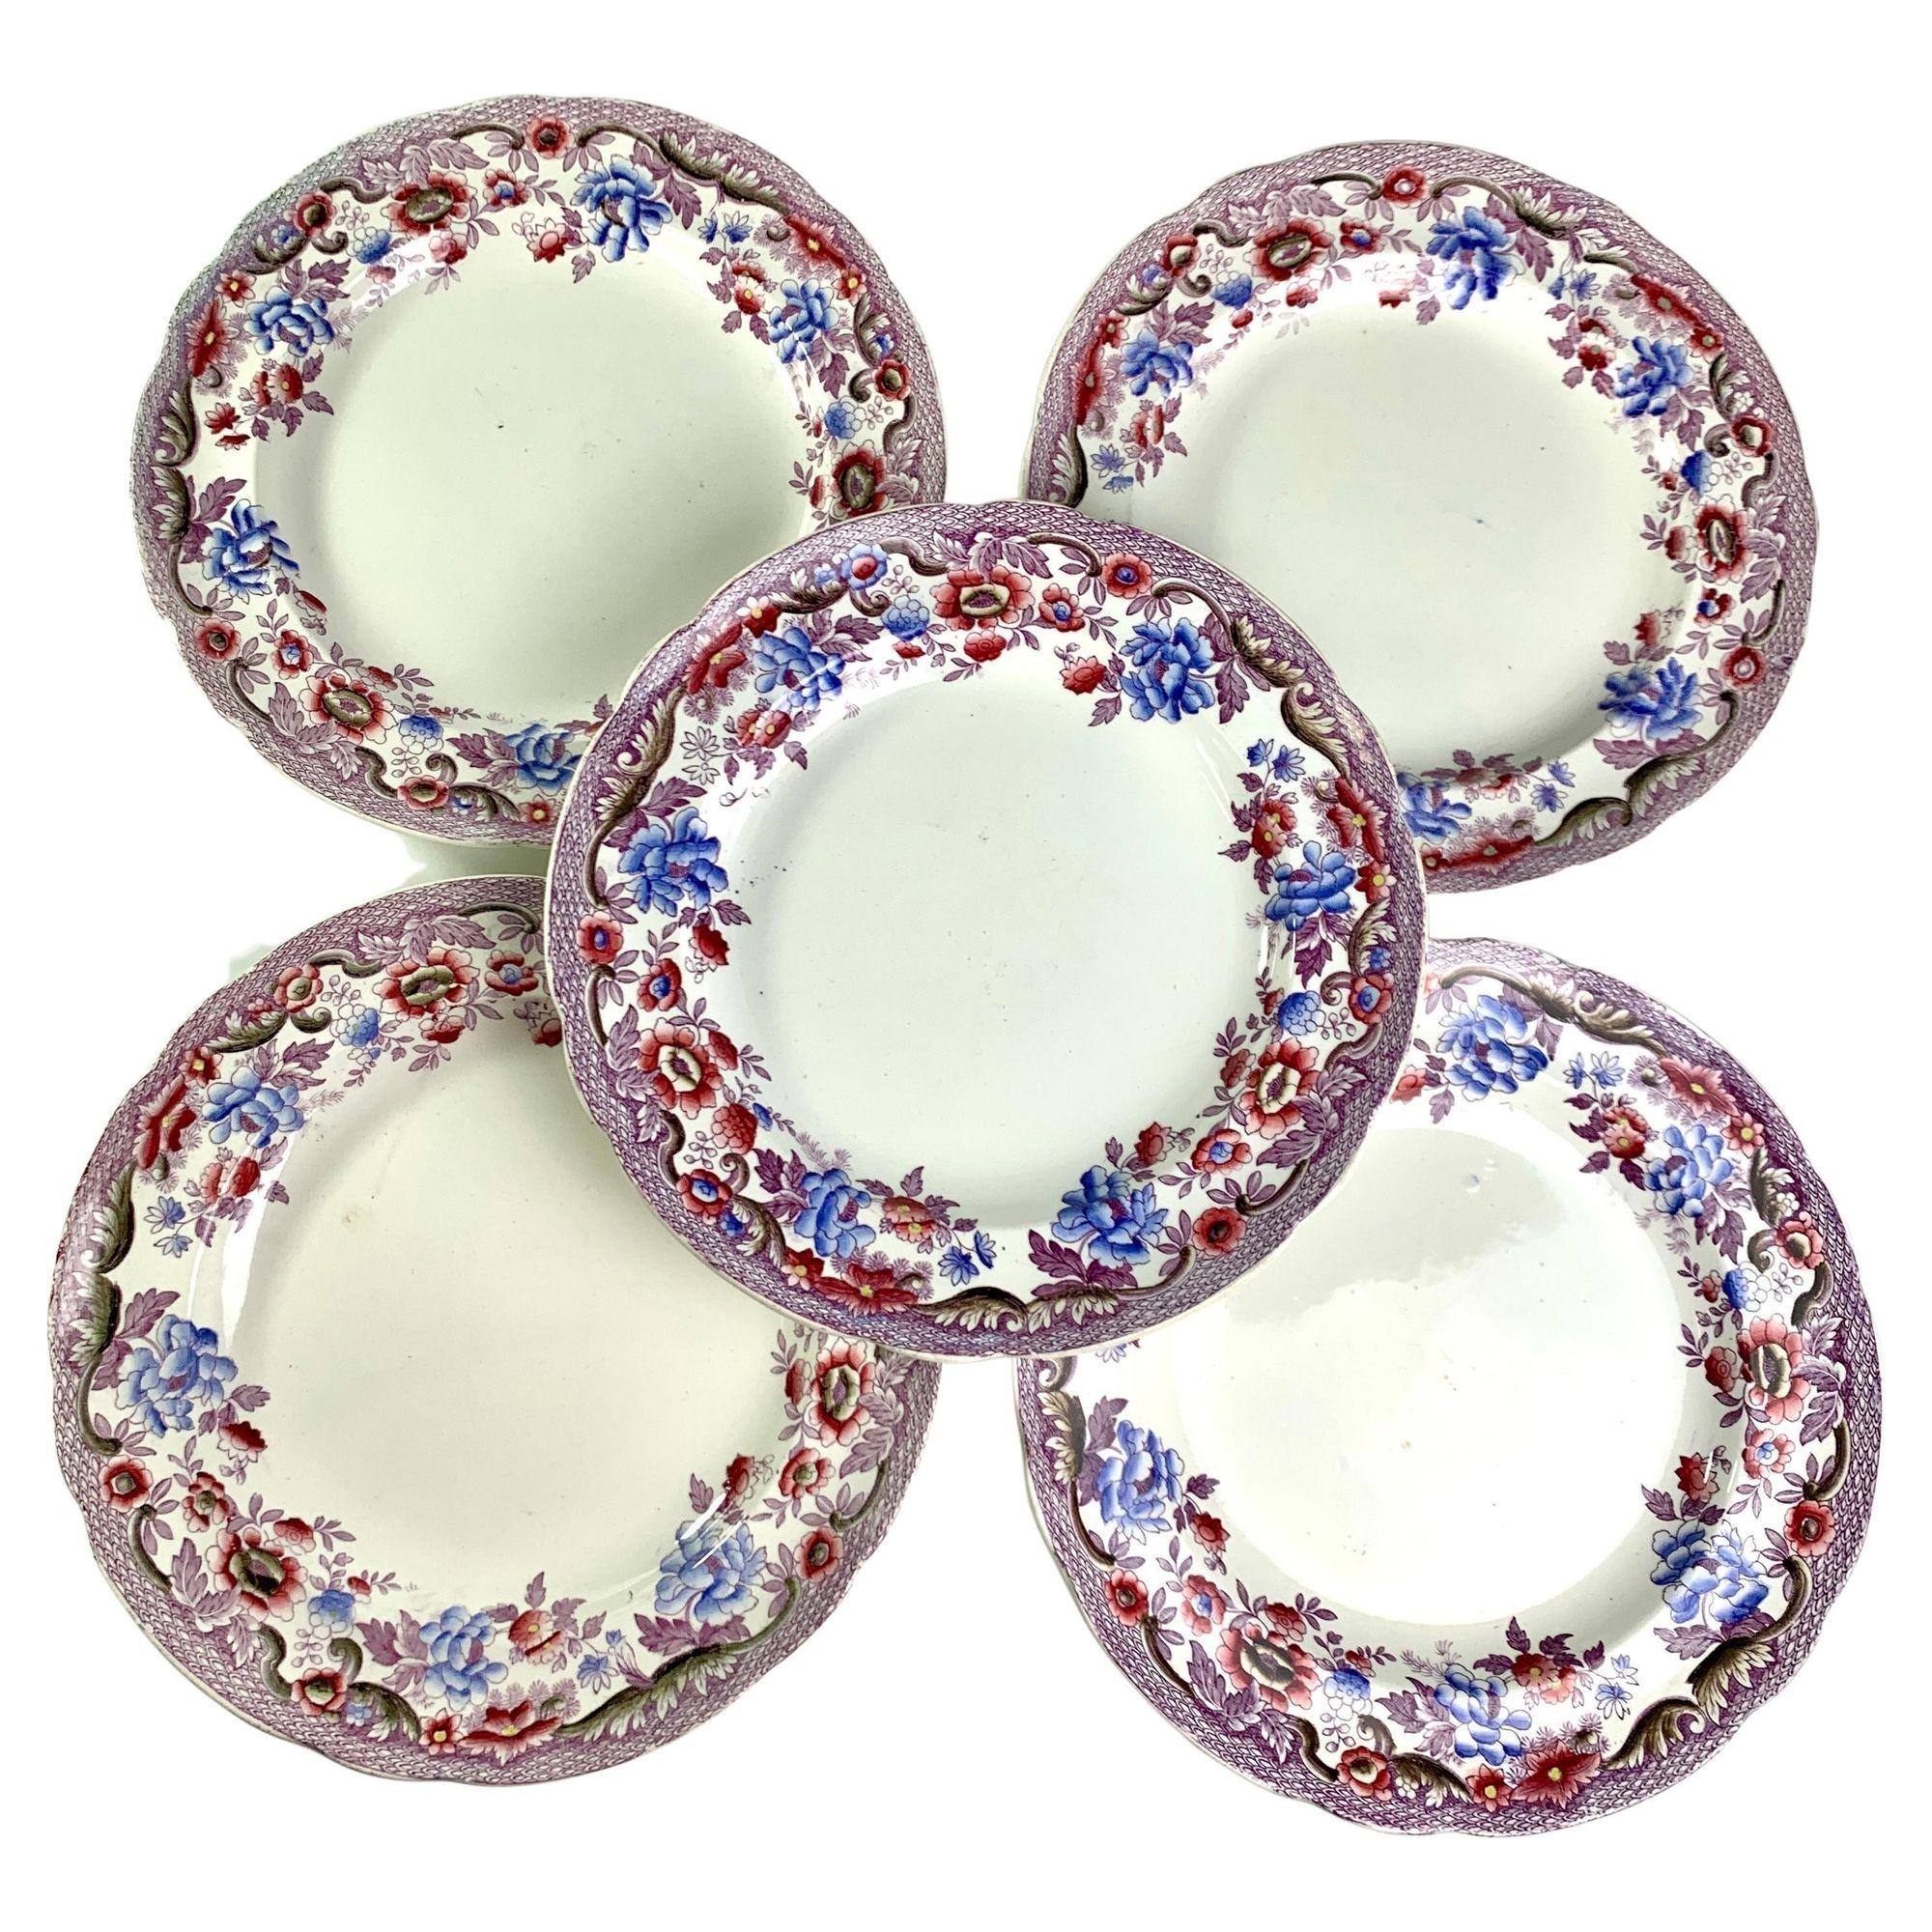 This set of a dozen antique earthenware dishes has beautiful borders filled with flowers painted in dusty purple and light blue, some with pale yellow centers and purple leaves.
Close to the edge of the dish, we see a pattern of purple darts.
The